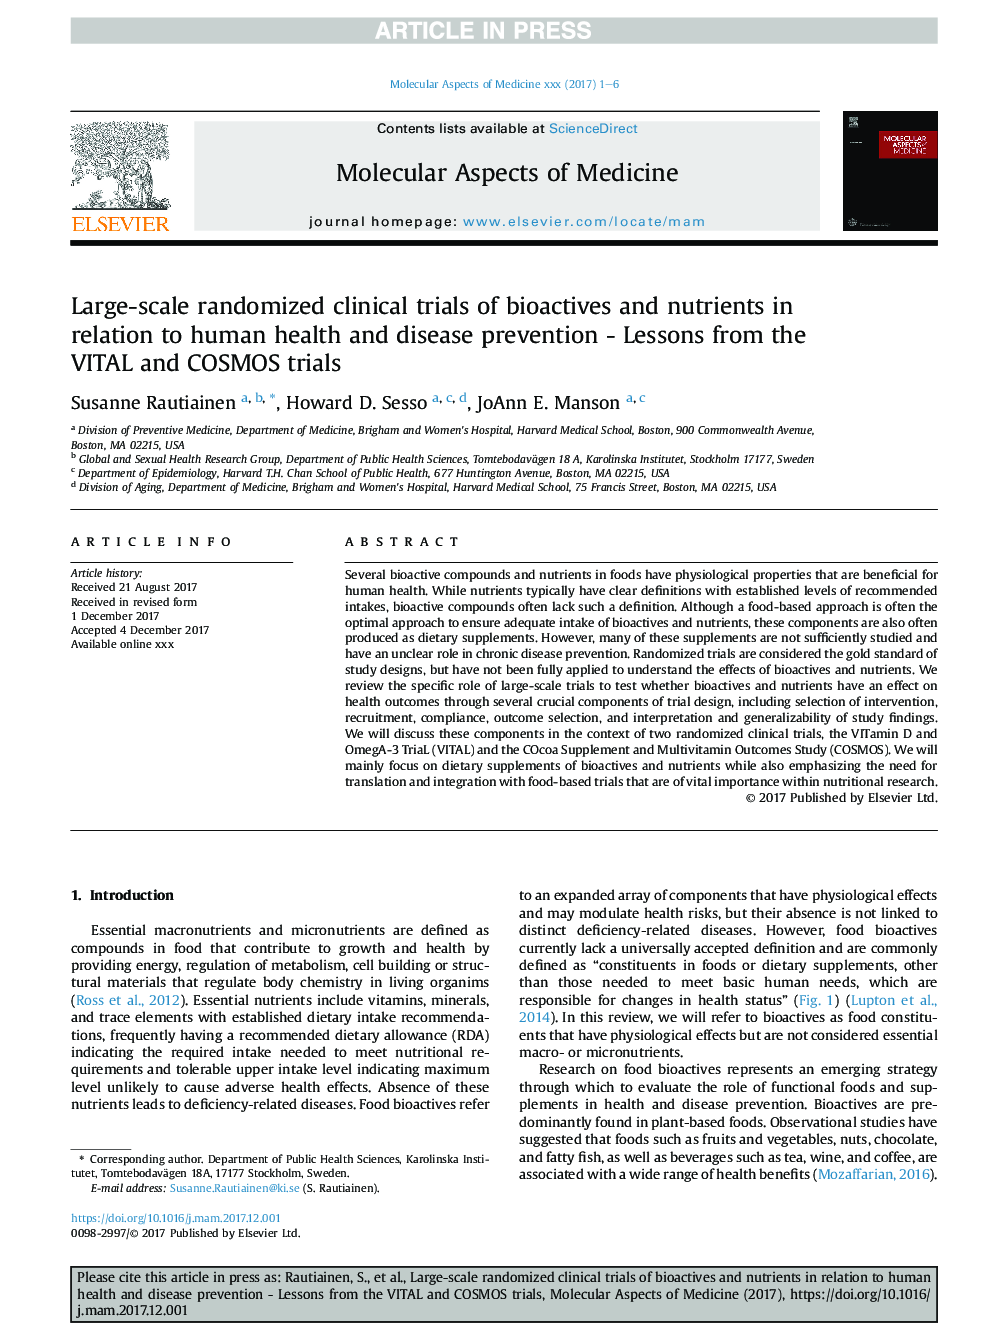 Large-scale randomized clinical trials of bioactives and nutrients in relation to human health and disease prevention - Lessons from the VITAL and COSMOS trials